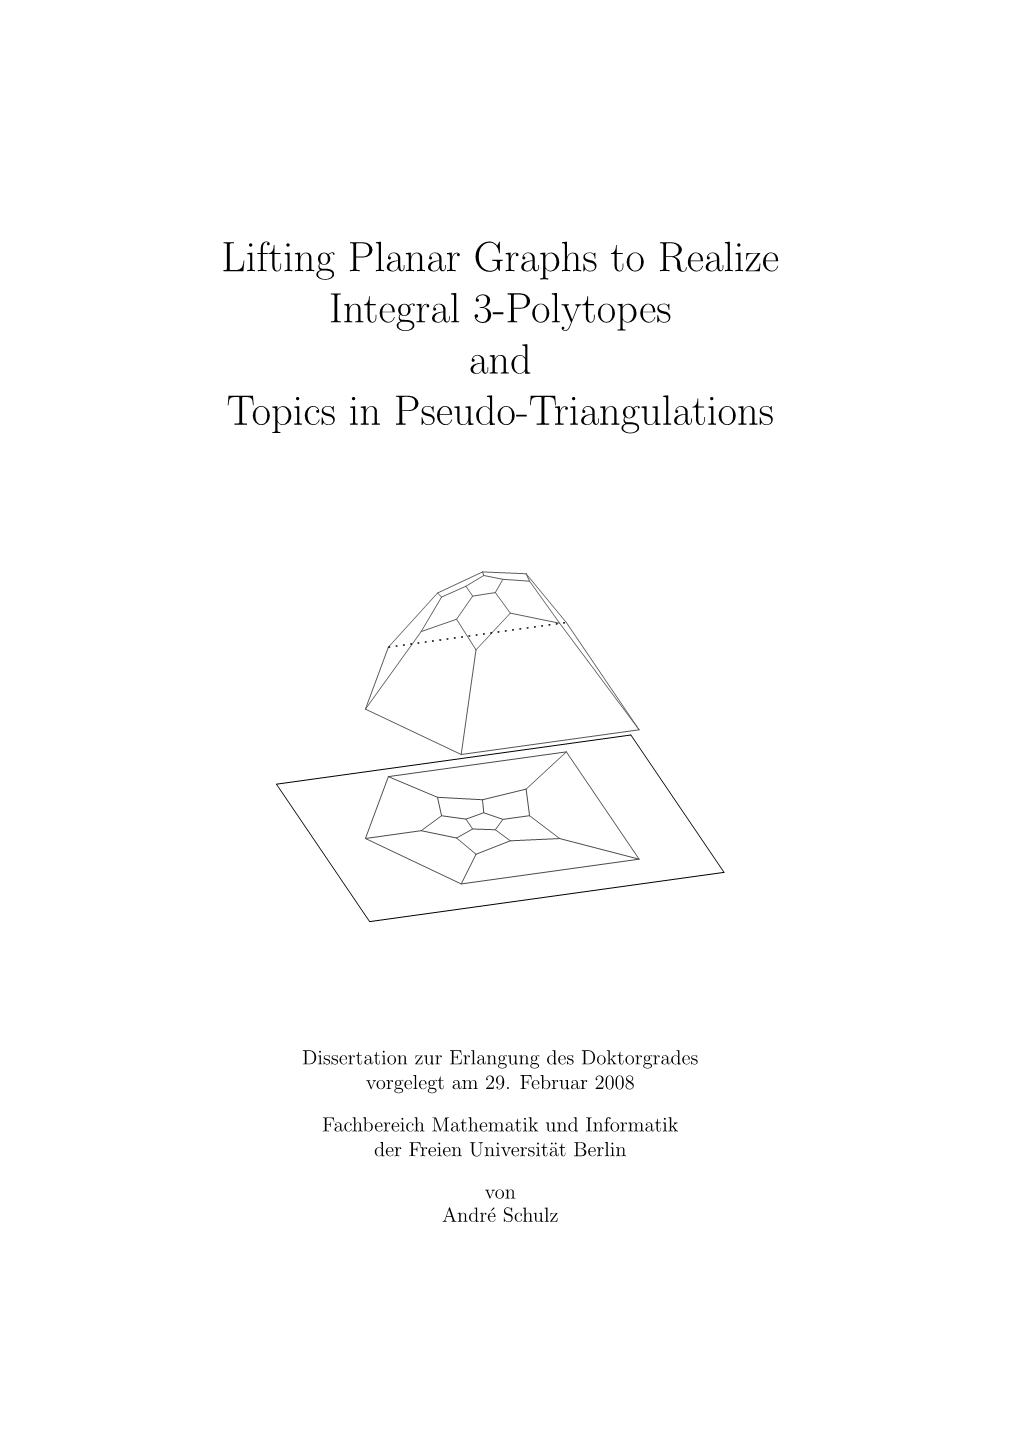 Lifting Planar Graphs to Realize Integral 3-Polytopes and Topics in Pseudo-Triangulations